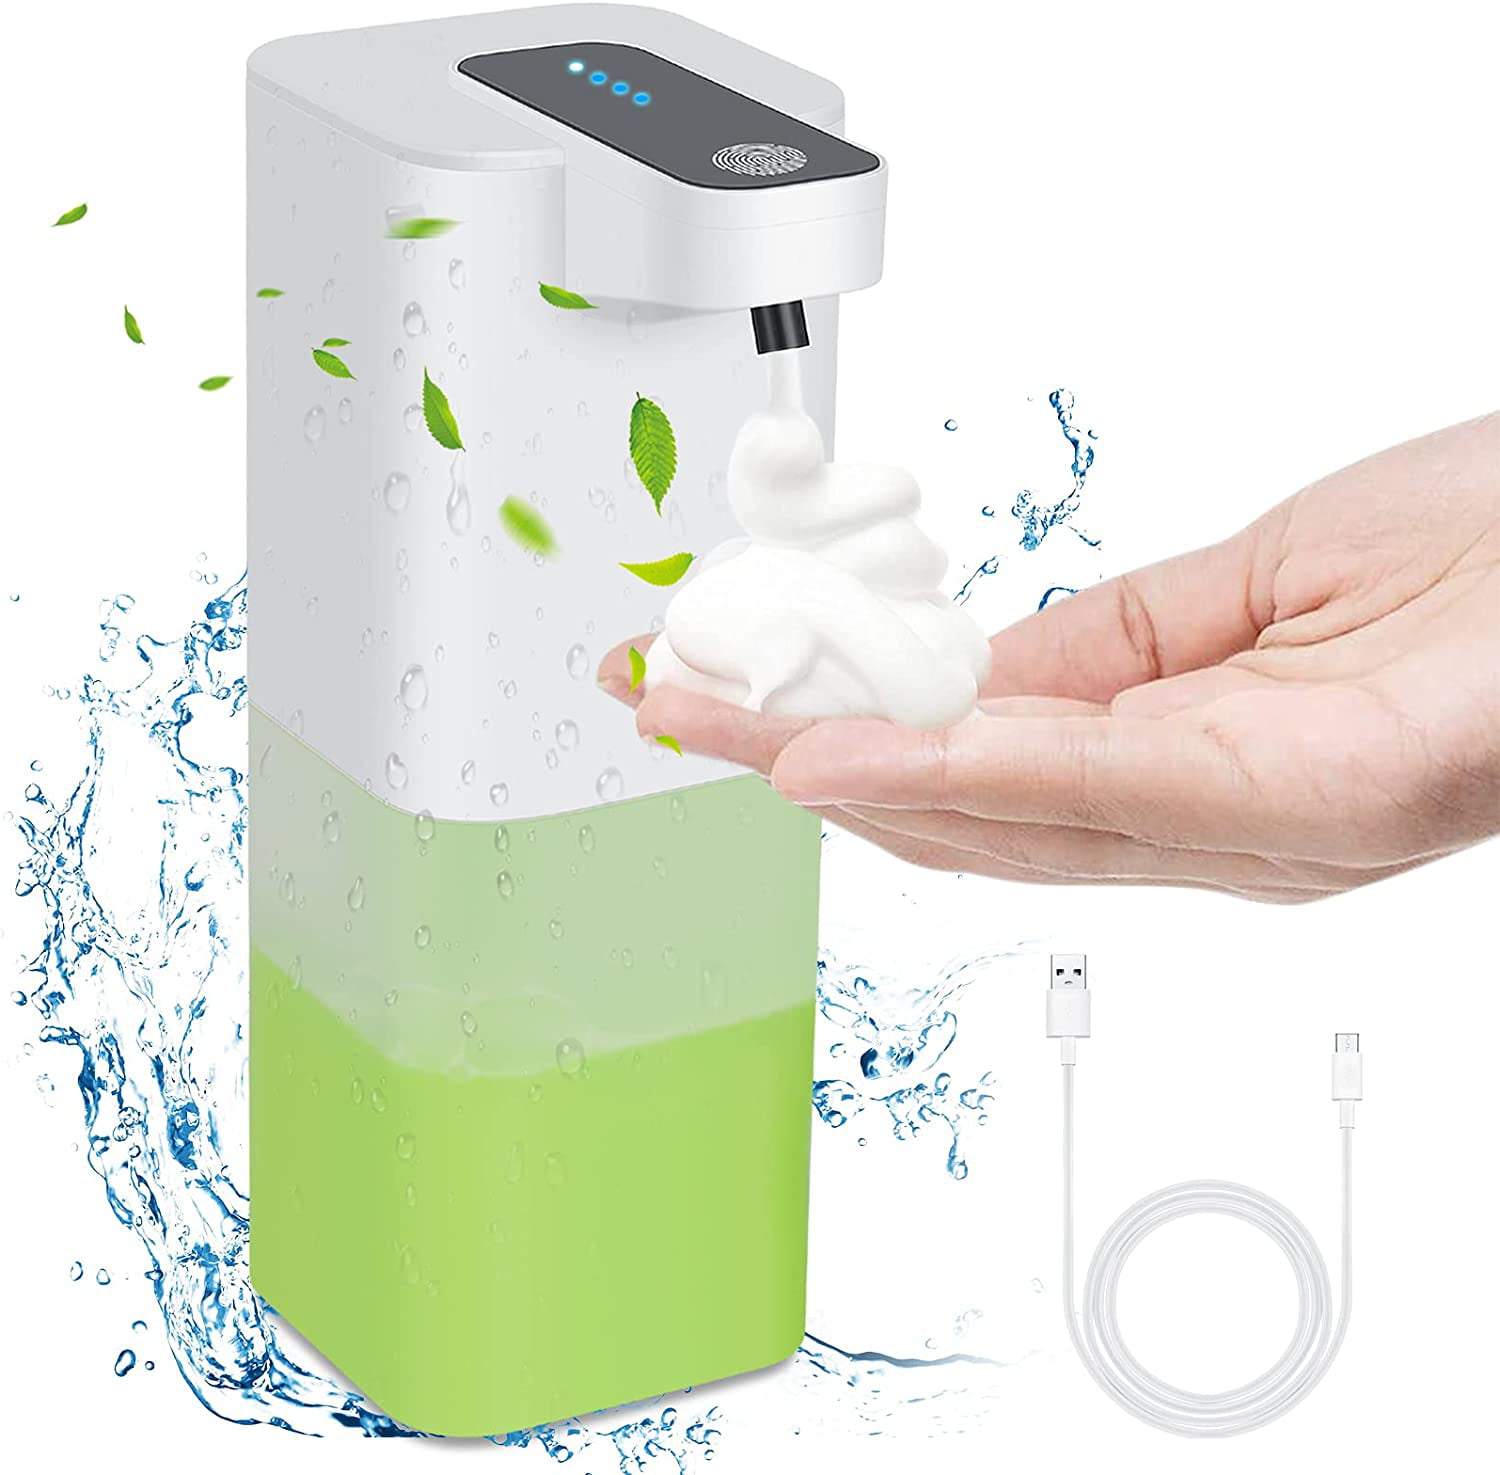 Automatic Soap Dispenser, Touchless Hand Sanitizer Dispenser, 4 Adjustable  Speeds, USB Rechargeable Fast Foaming Speed - Walmart.com